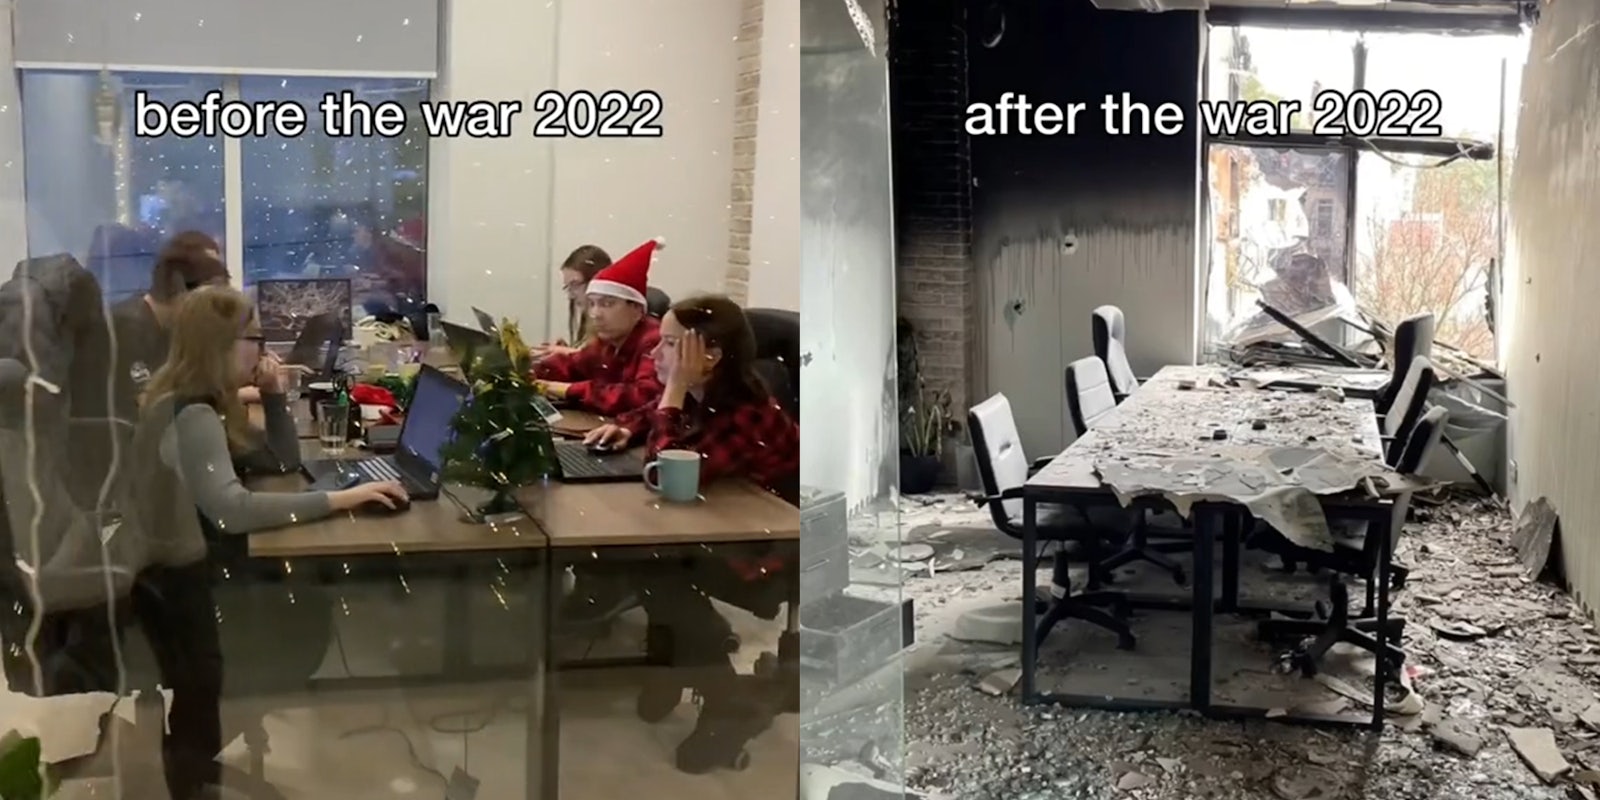 office workers at tables with caption 'before the war 2022' (l) same room after bombing with caption 'after the war 2022' (r)